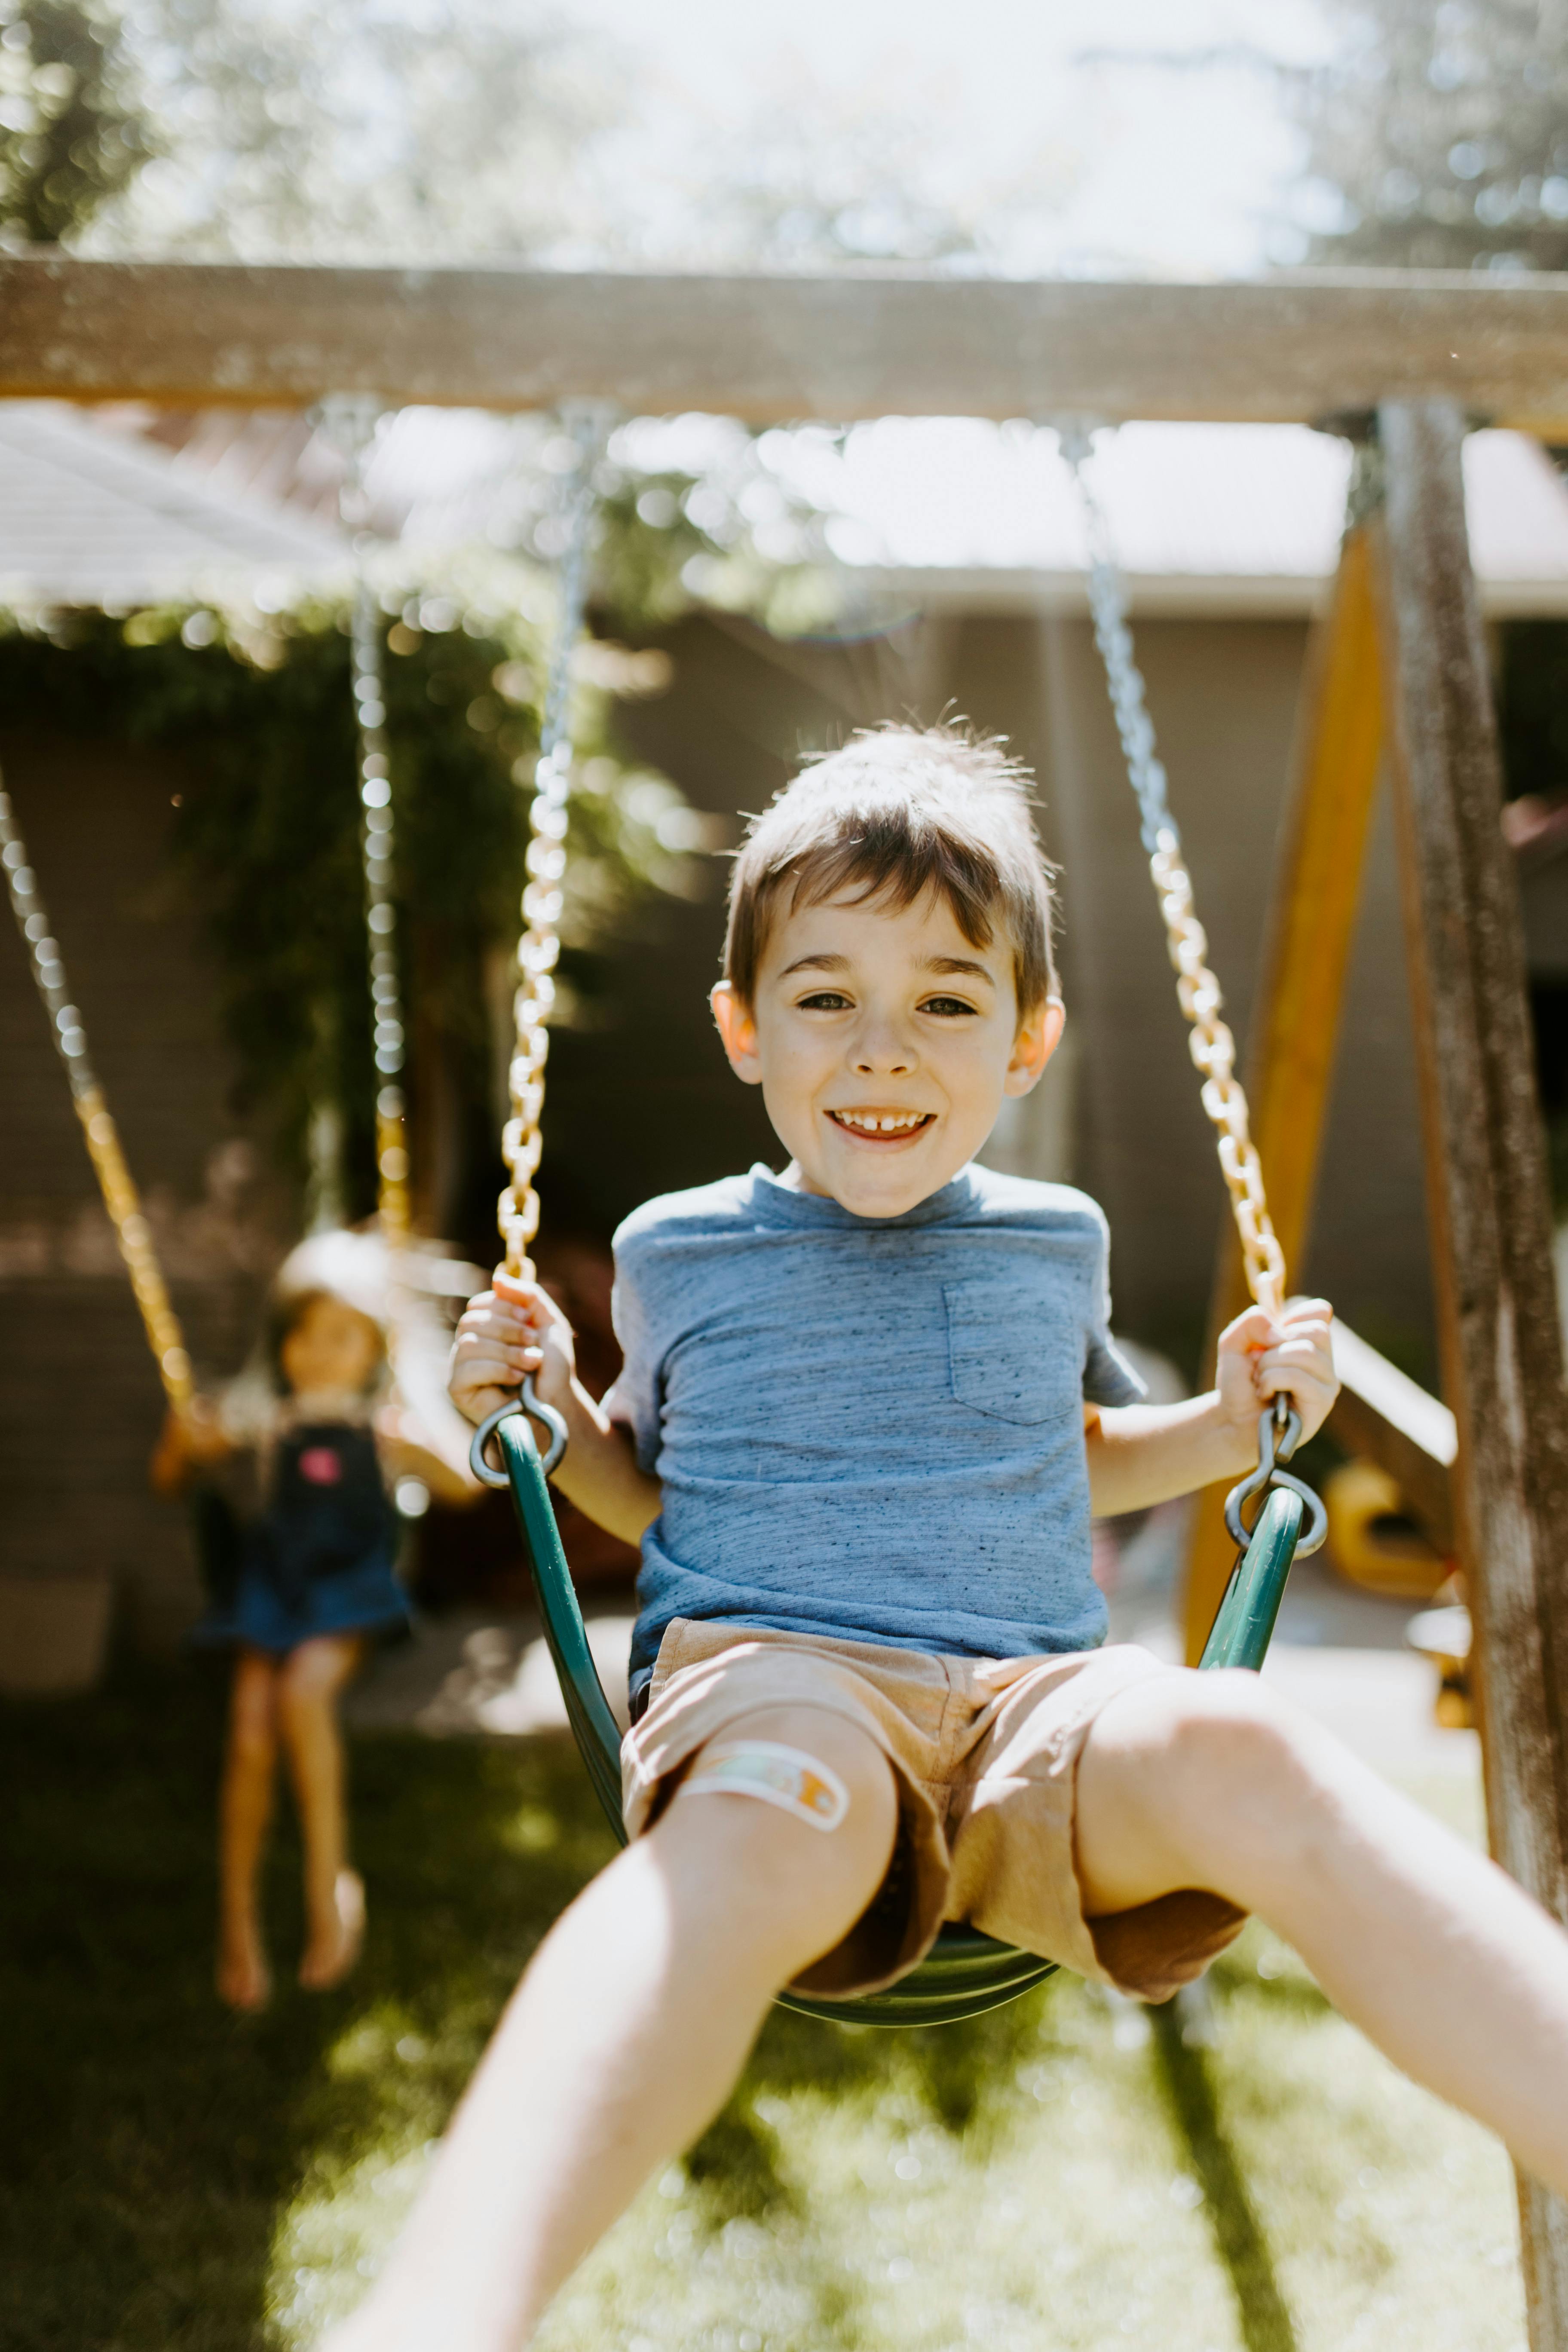 Happy child on a swing | Source: Pexels